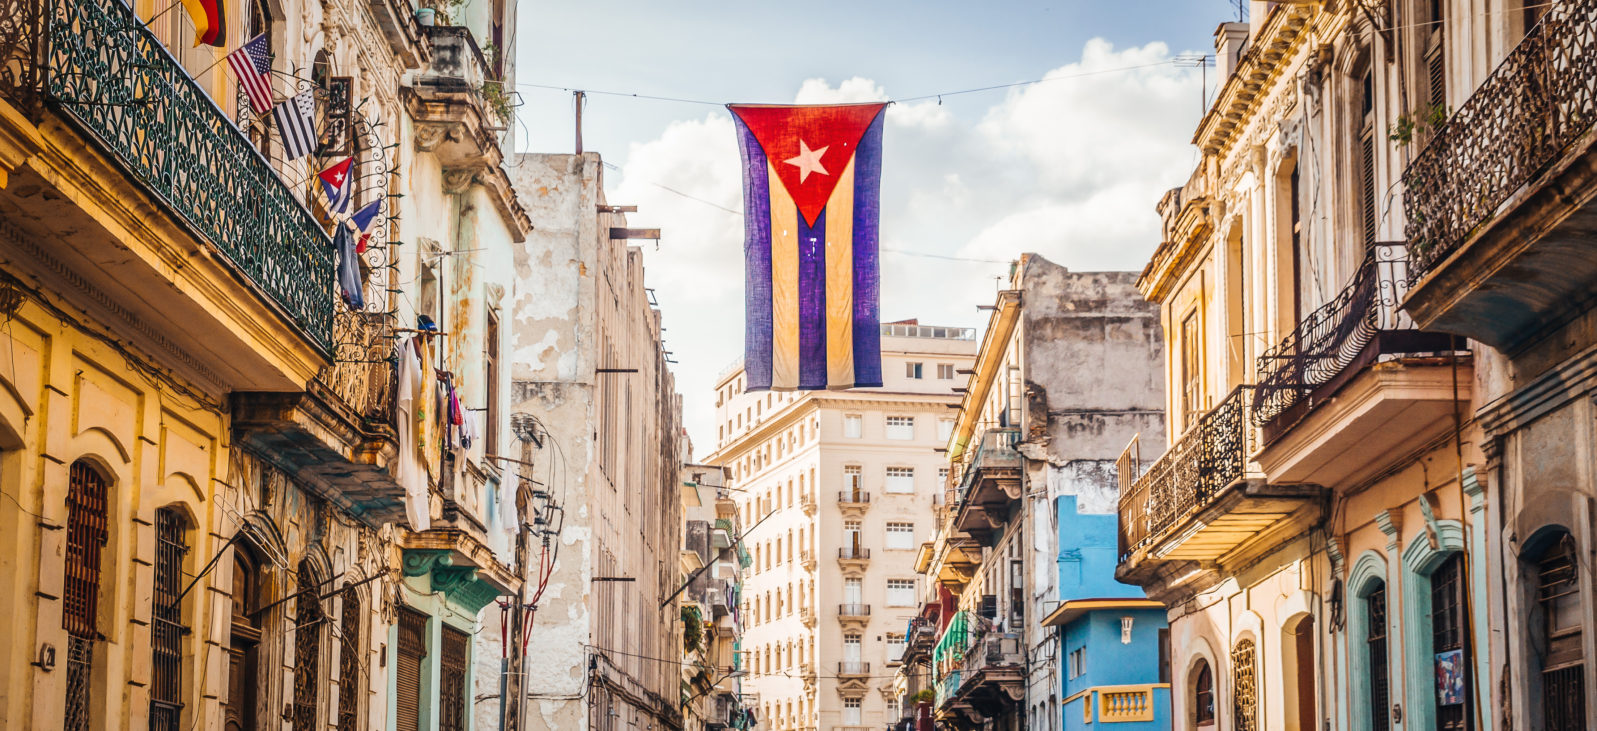 A cuban flag with holes waves over a street in Central Havana. La Habana, as the locals call it, is the capital city of Cuba